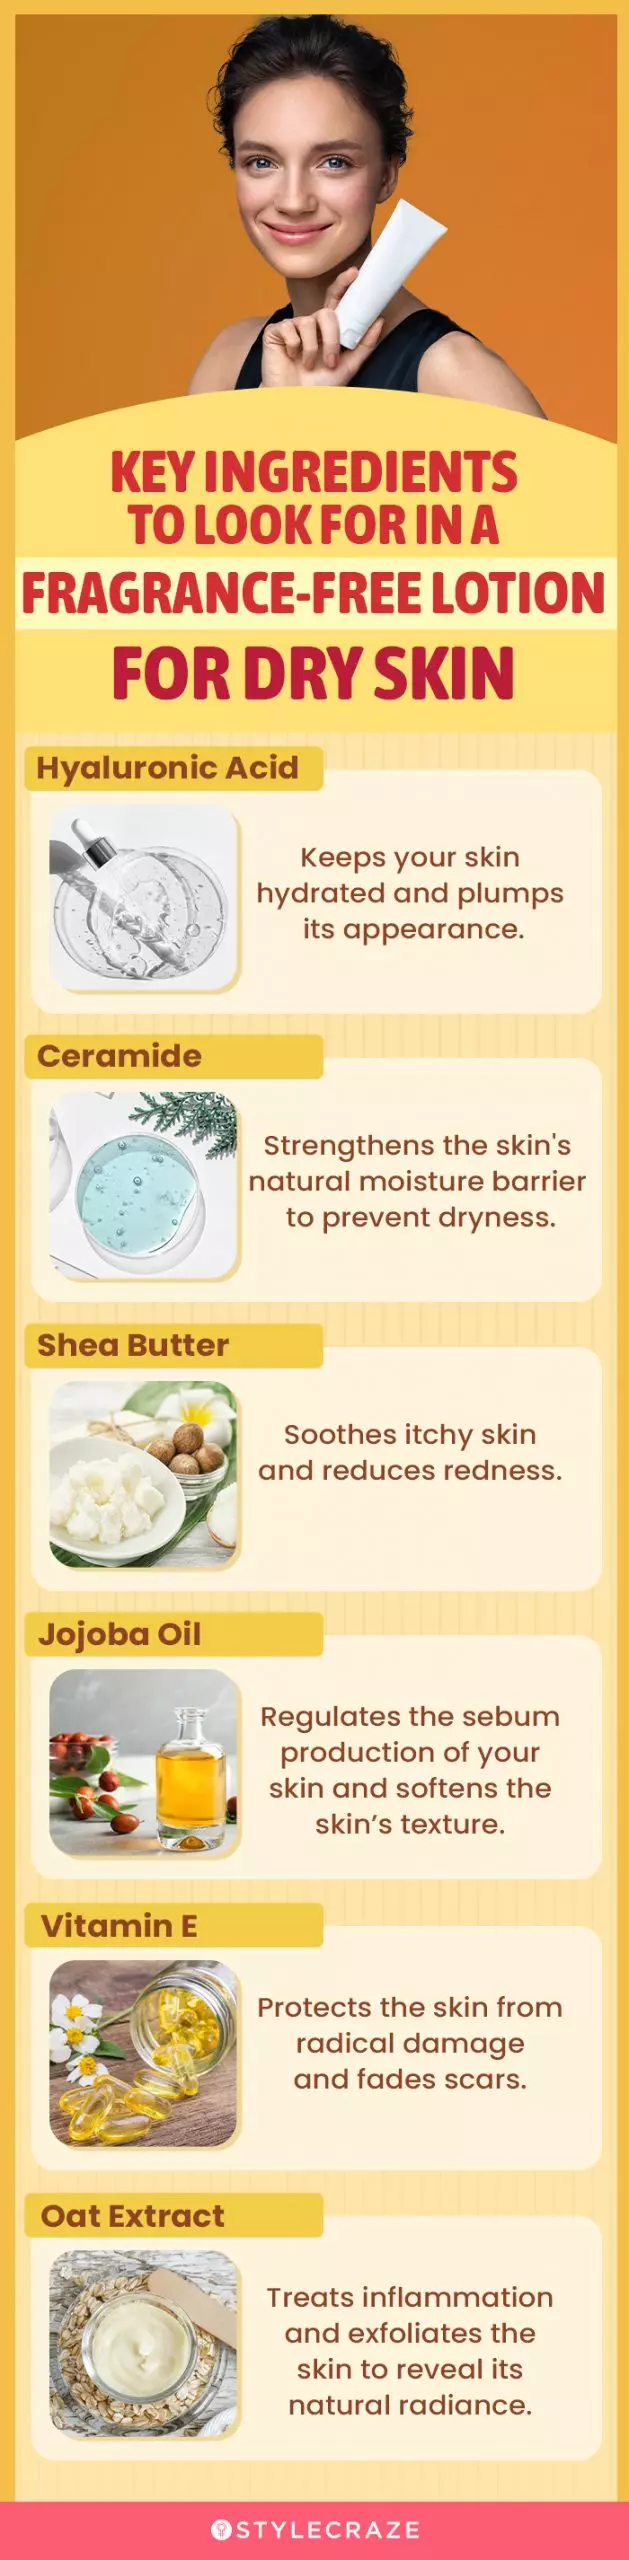 Key Ingredients To Look For In A Fragrance-Free Lotion For Dry Skin (infographic)